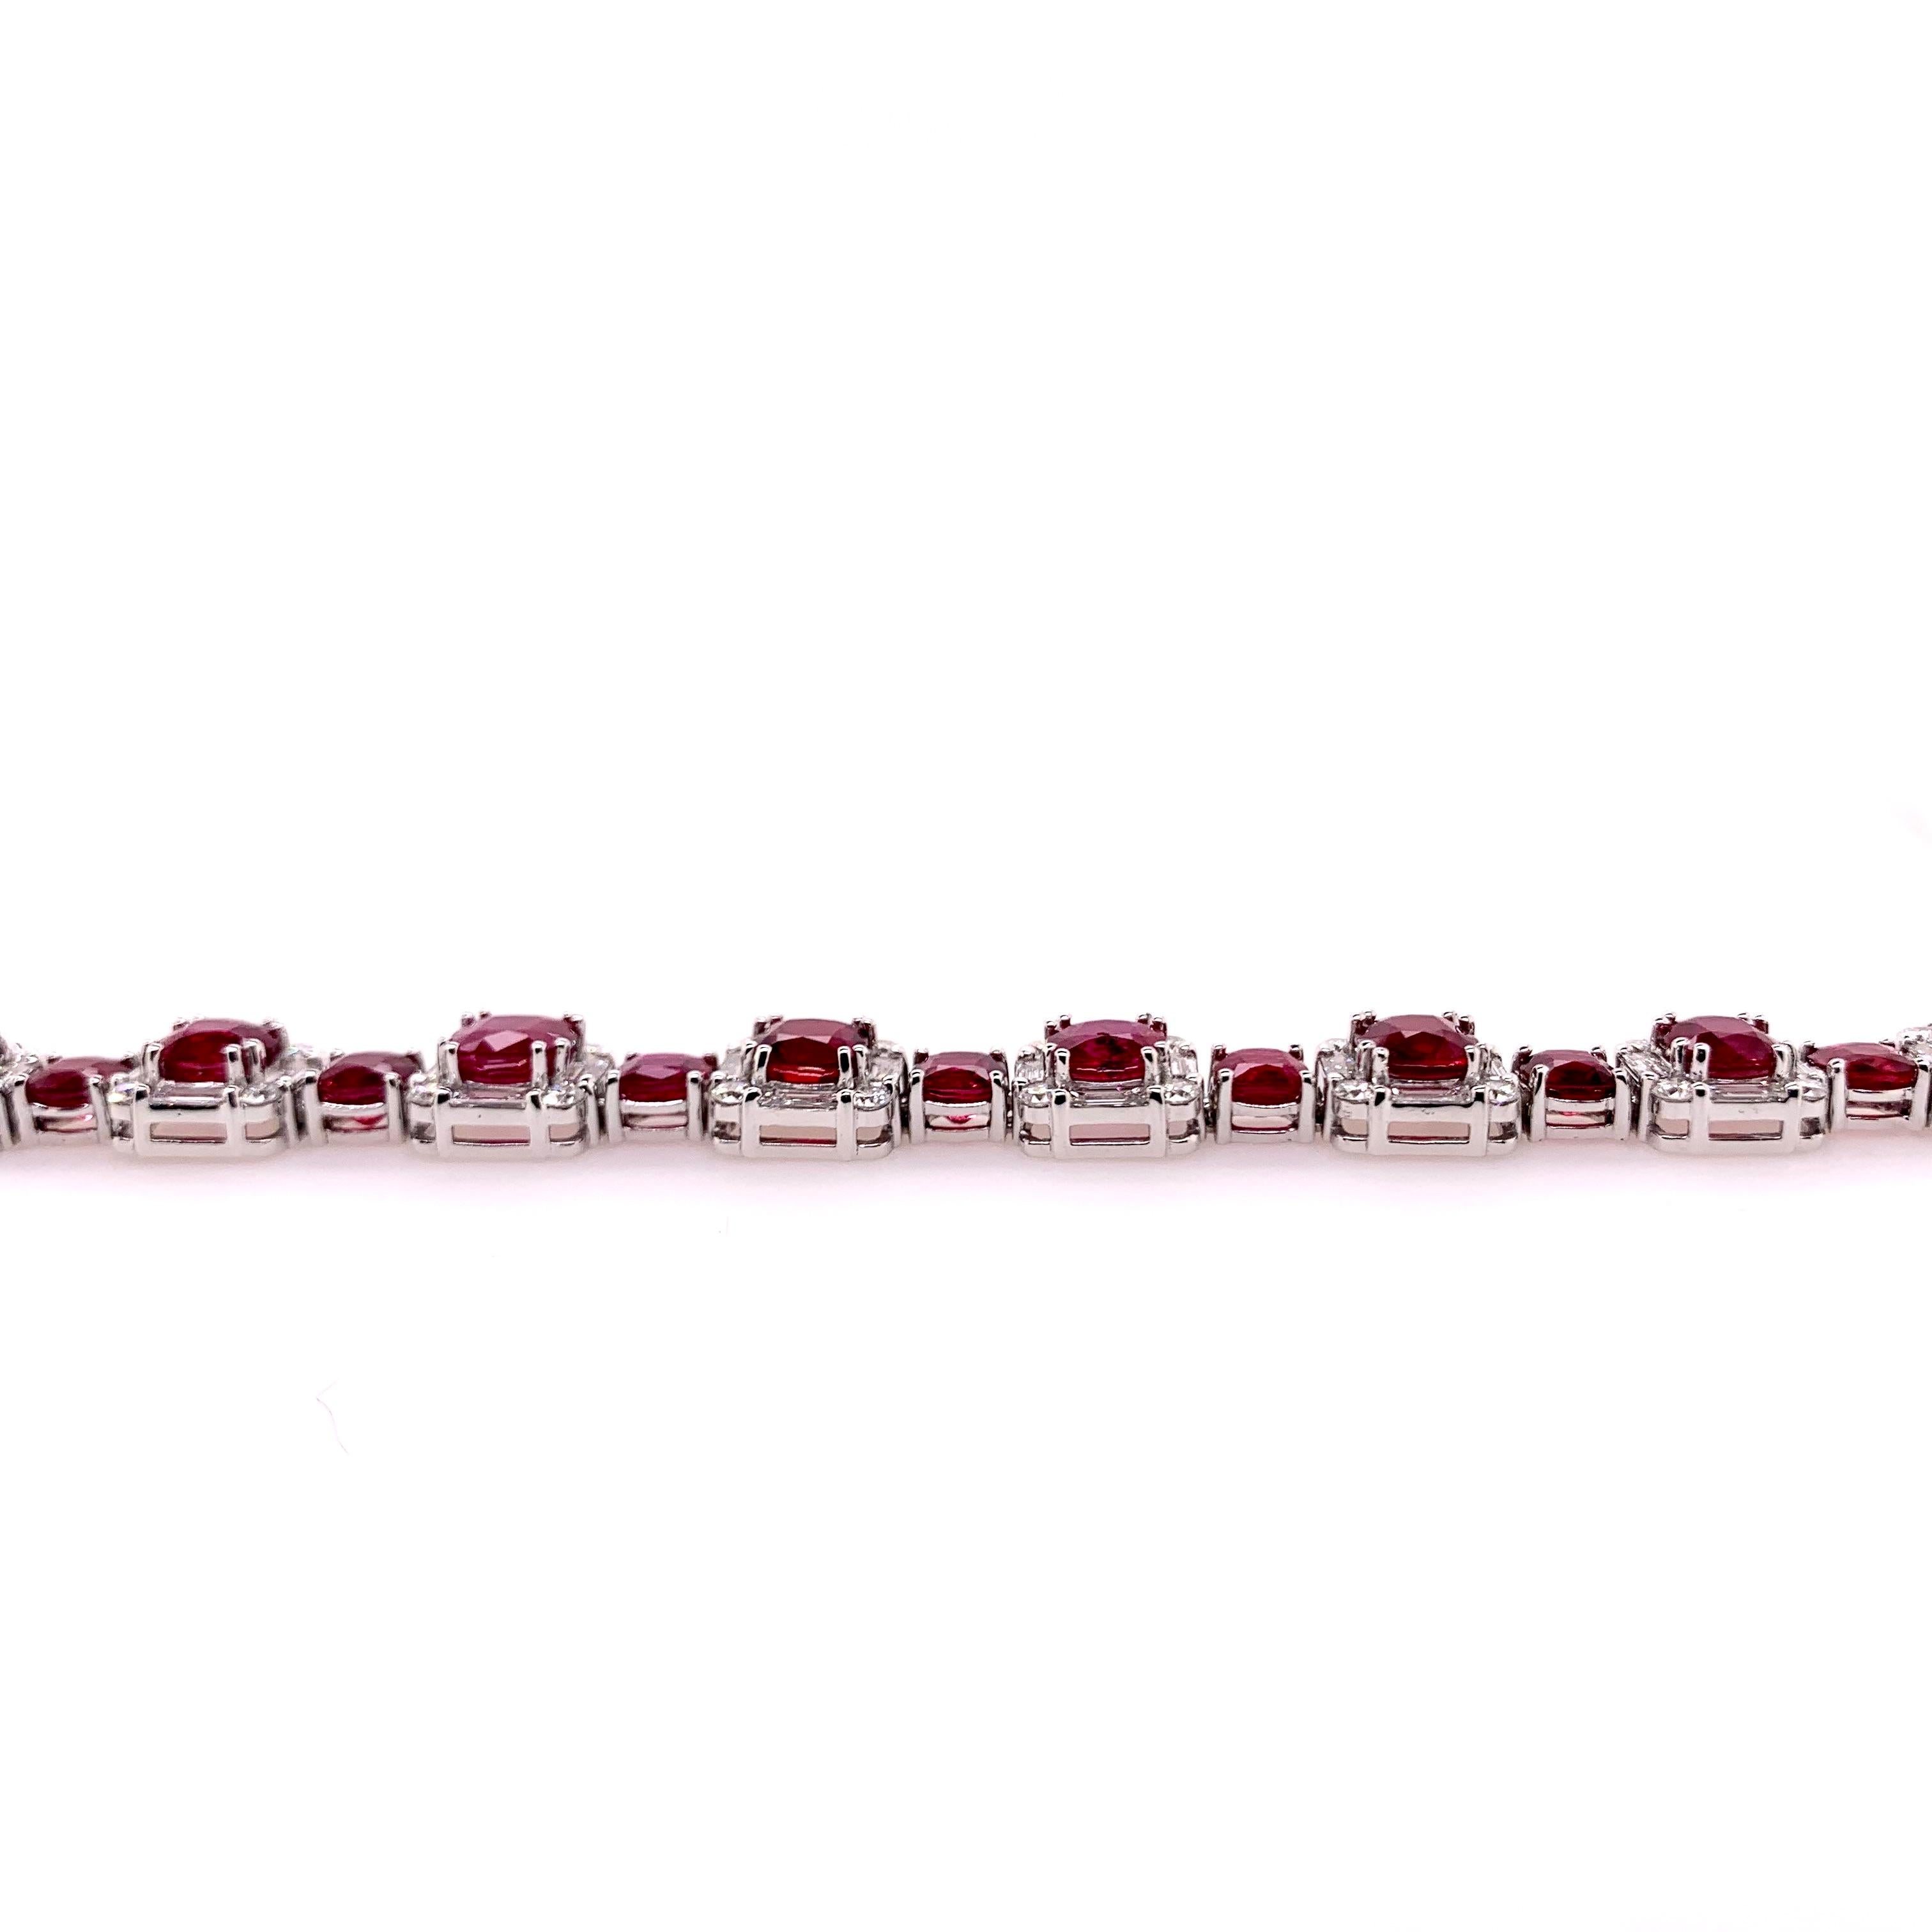 This handmade platinum setting bracelet showcases the vibrant rubies and has a tailored baguette and round brilliant diamond border on the alternating sections.  The rubies are top quality as evident by the deep crimson blood red color tone.

Ruby :